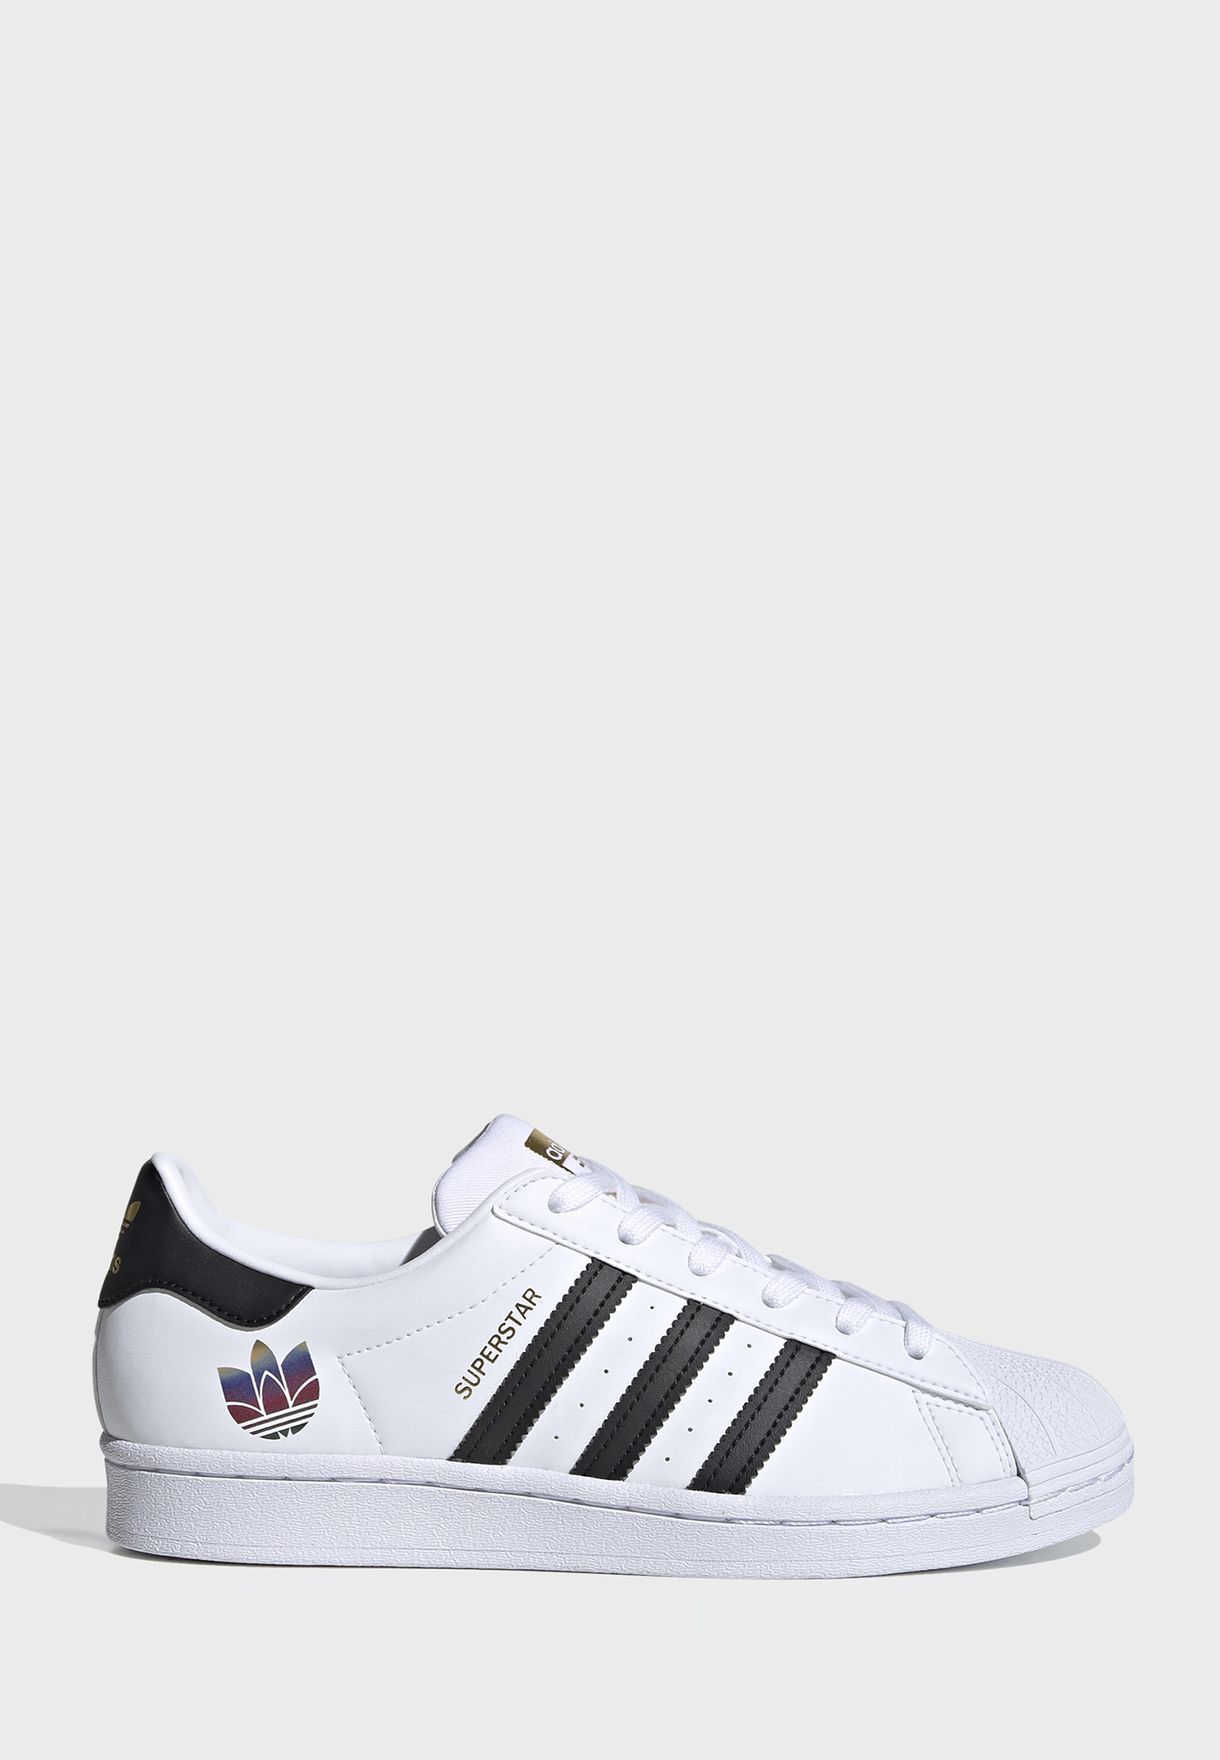 adidas women's gym shoes